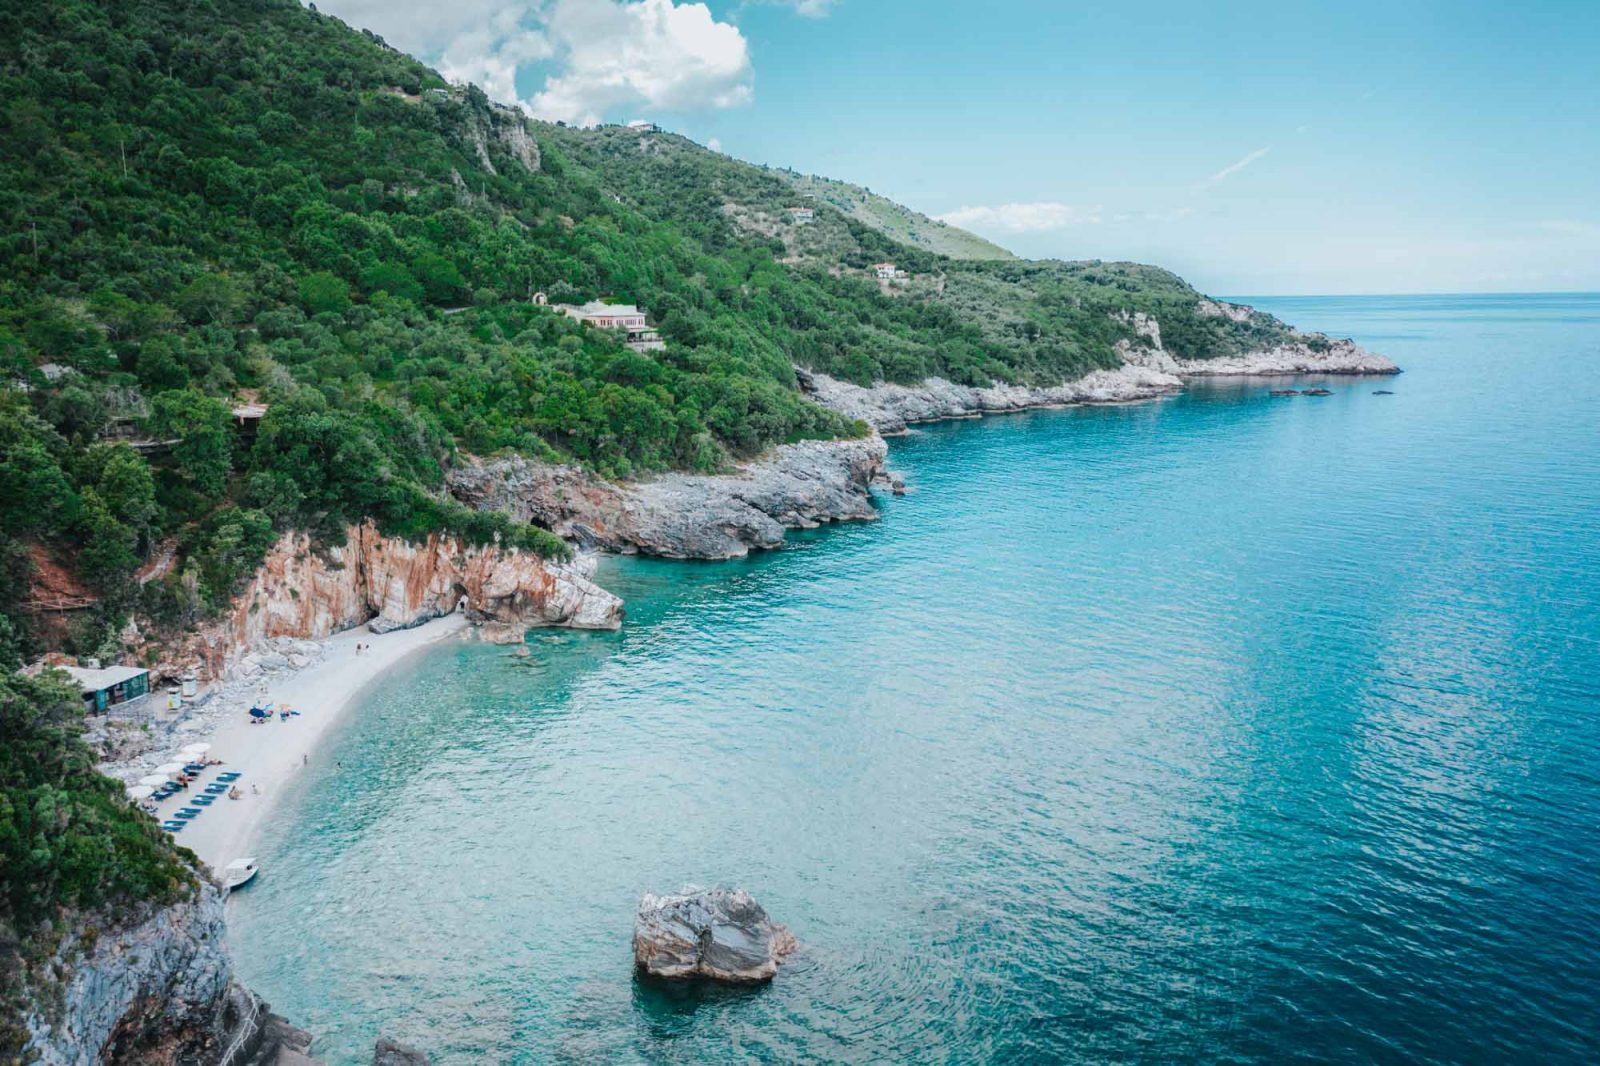 Unwind and Relax in the Tranquil Atmosphere of Pelion Peninsula